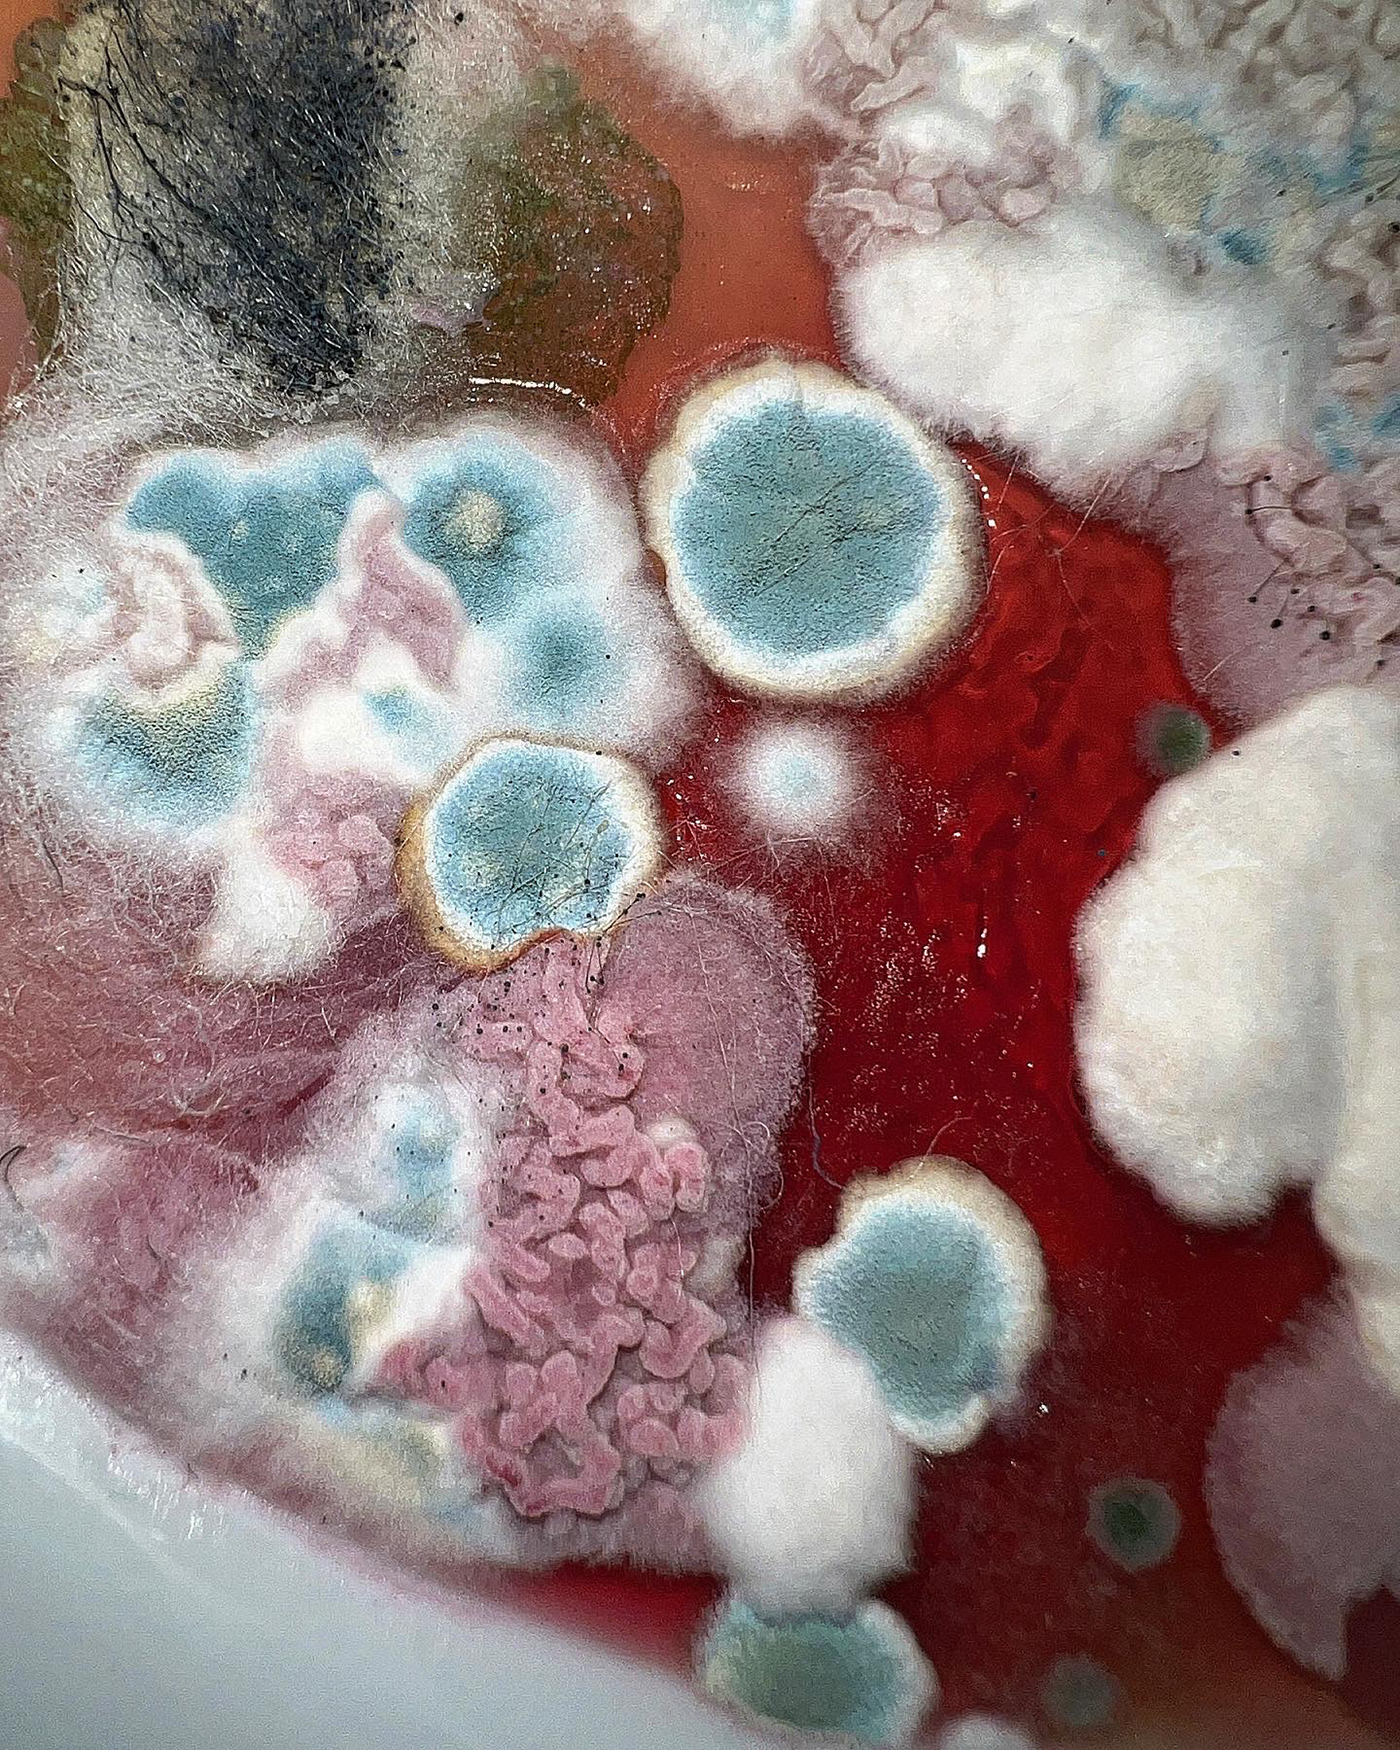 molds Ferment Bacteria beauty pattern palette Cheese spores Cultivate pigments colours bluecheese